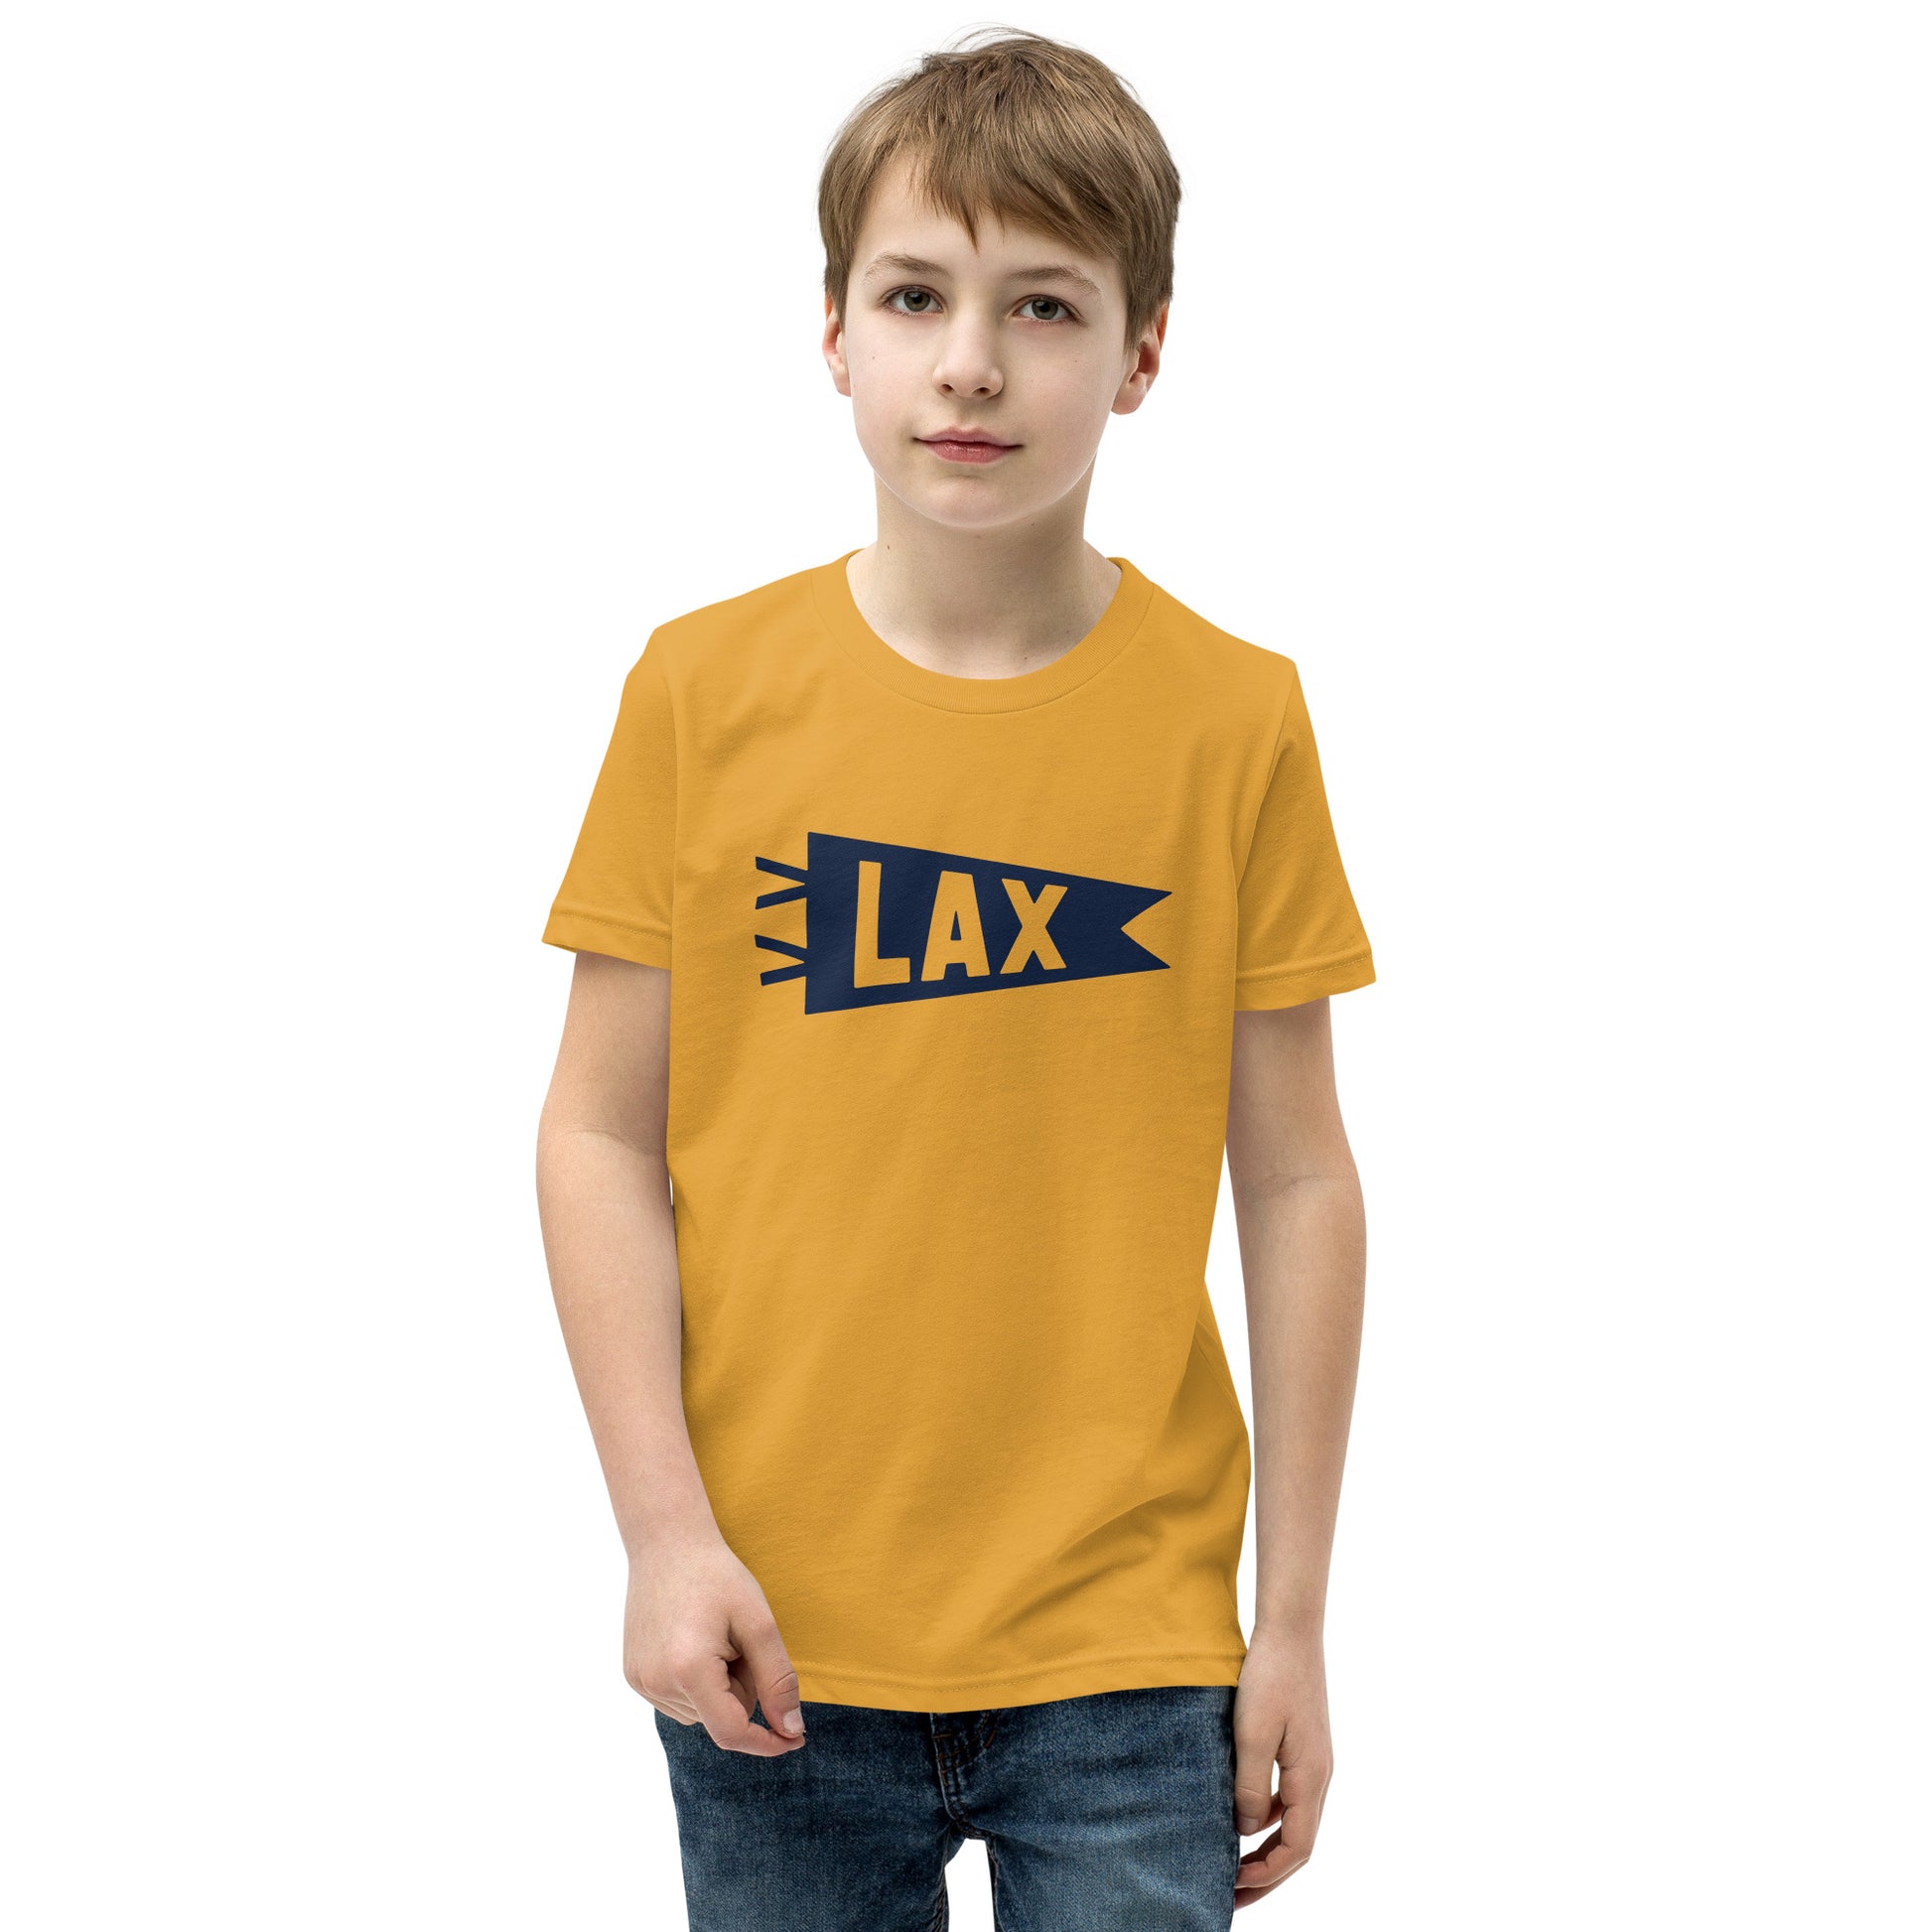 Kid's Airport Code Tee - Navy Blue Graphic • LAX Los Angeles • YHM Designs - Image 08